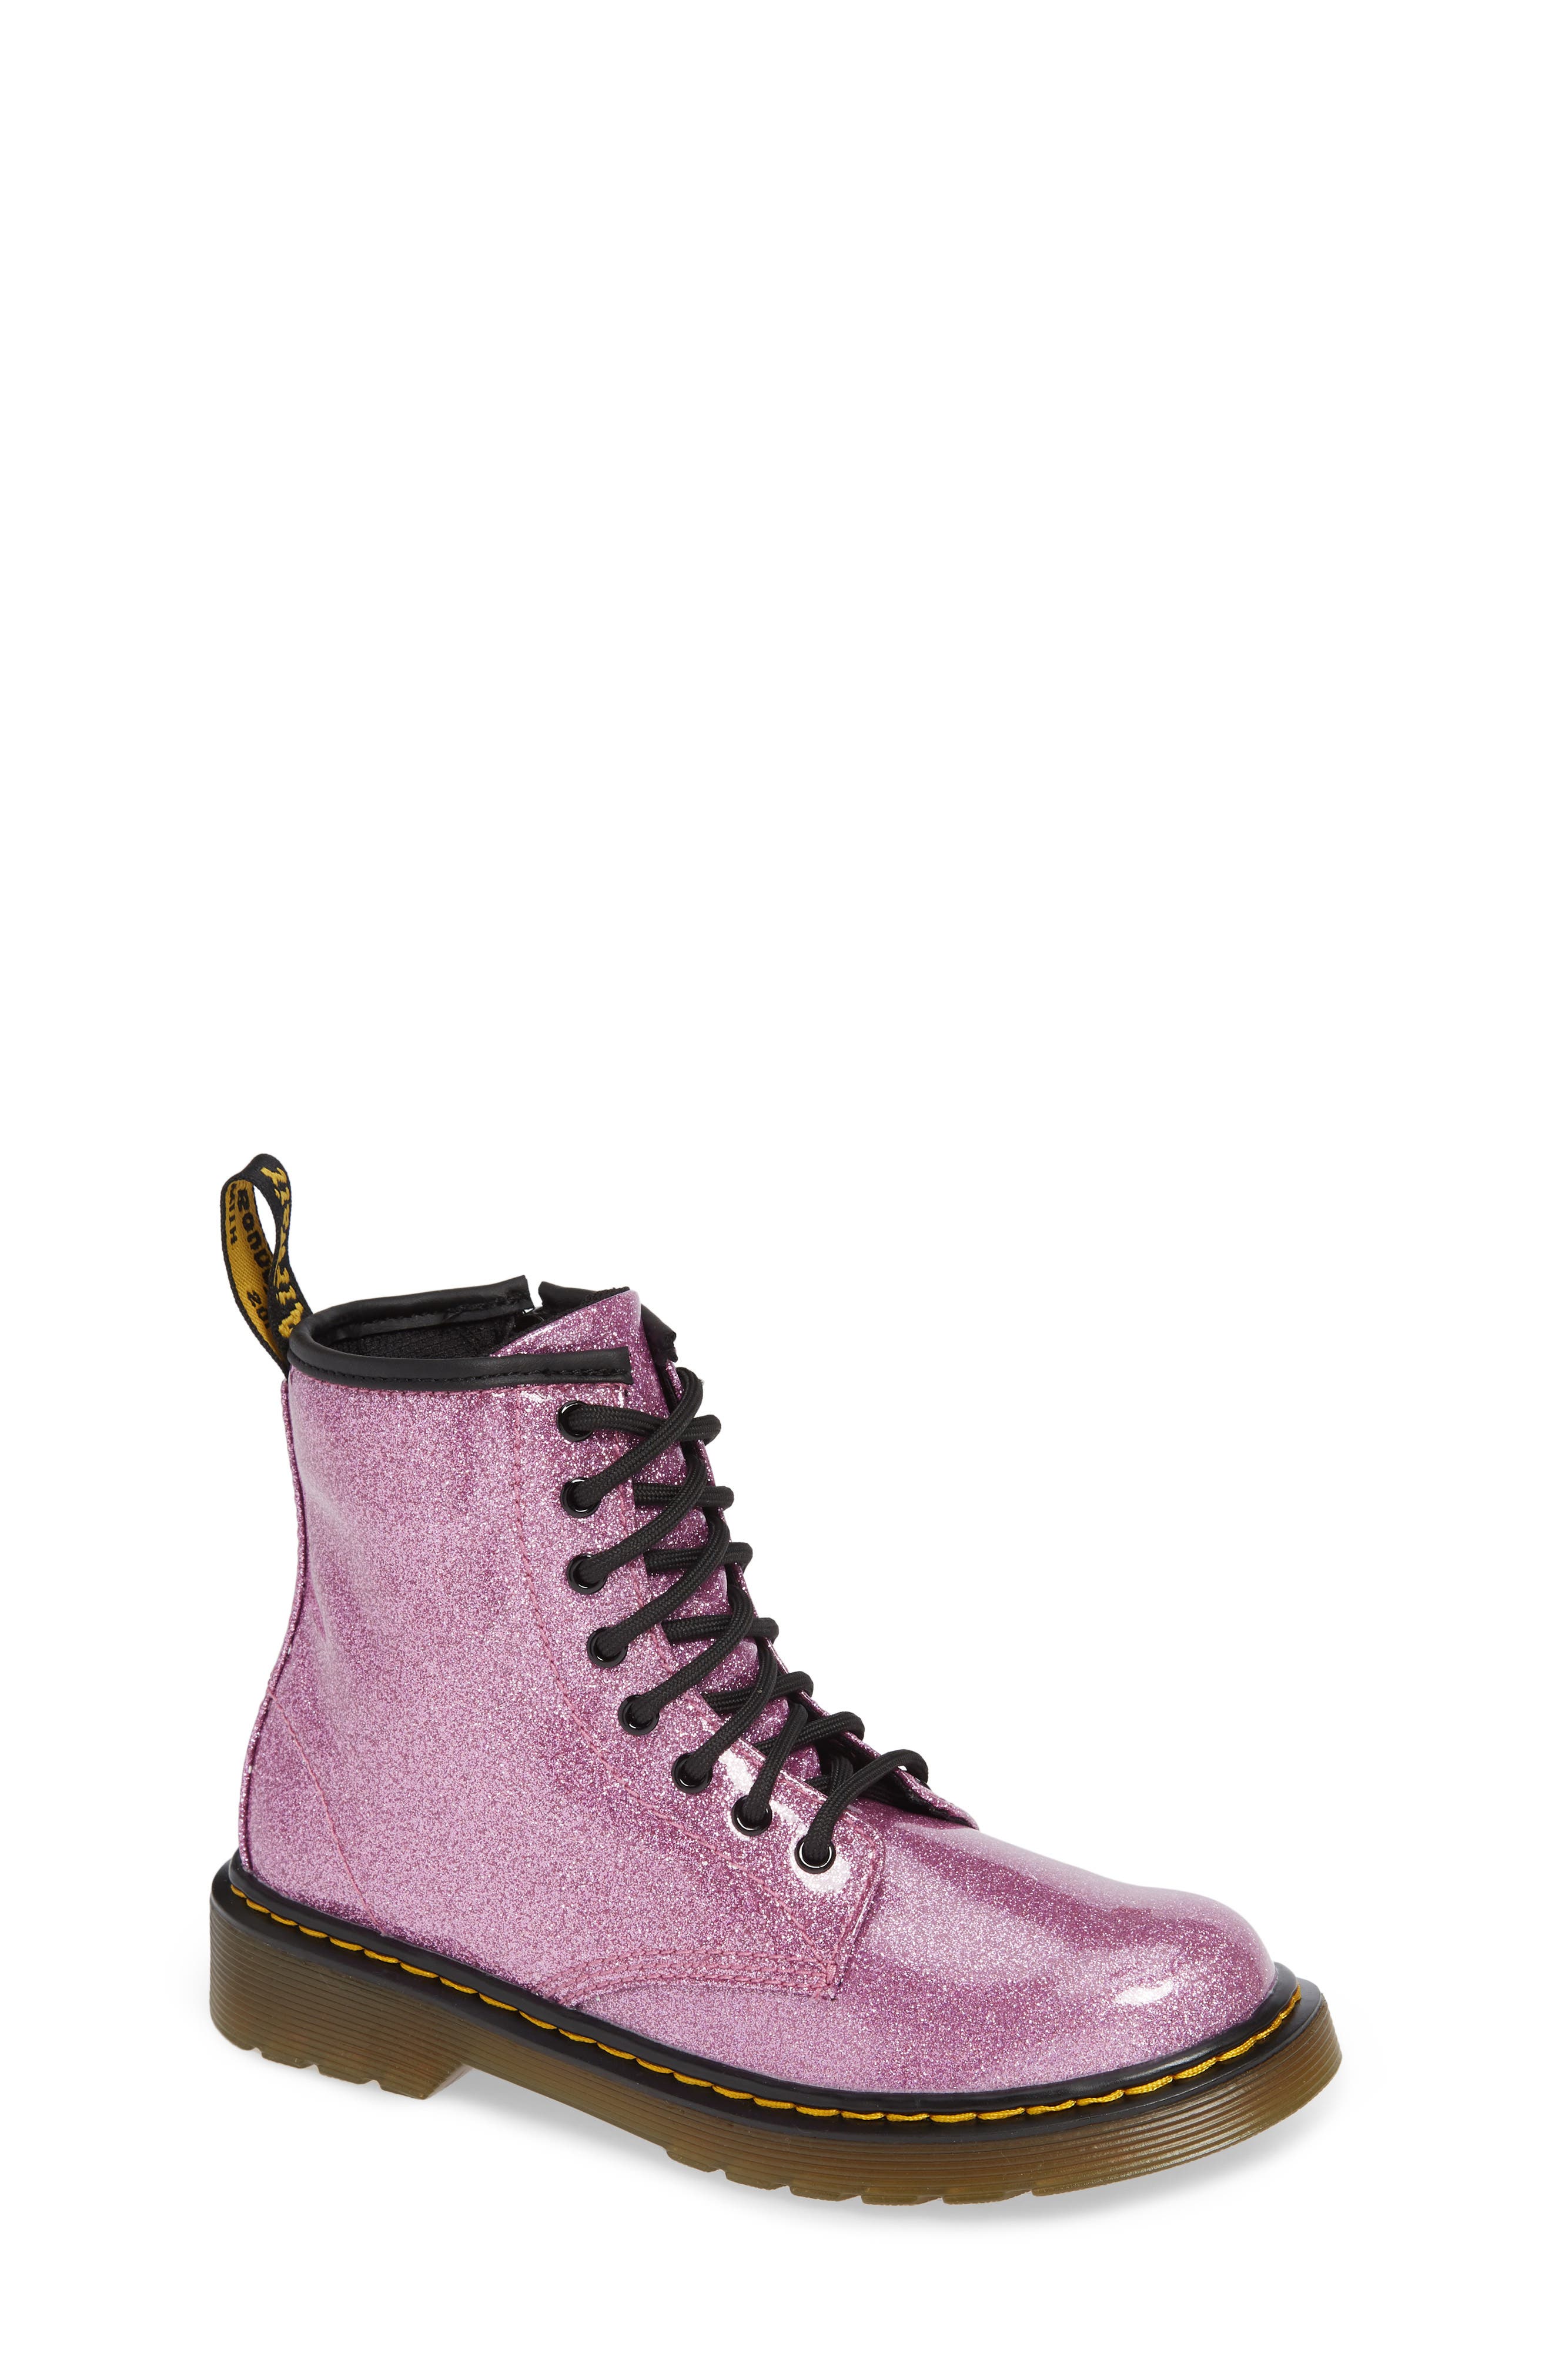 dr marten youth size 5